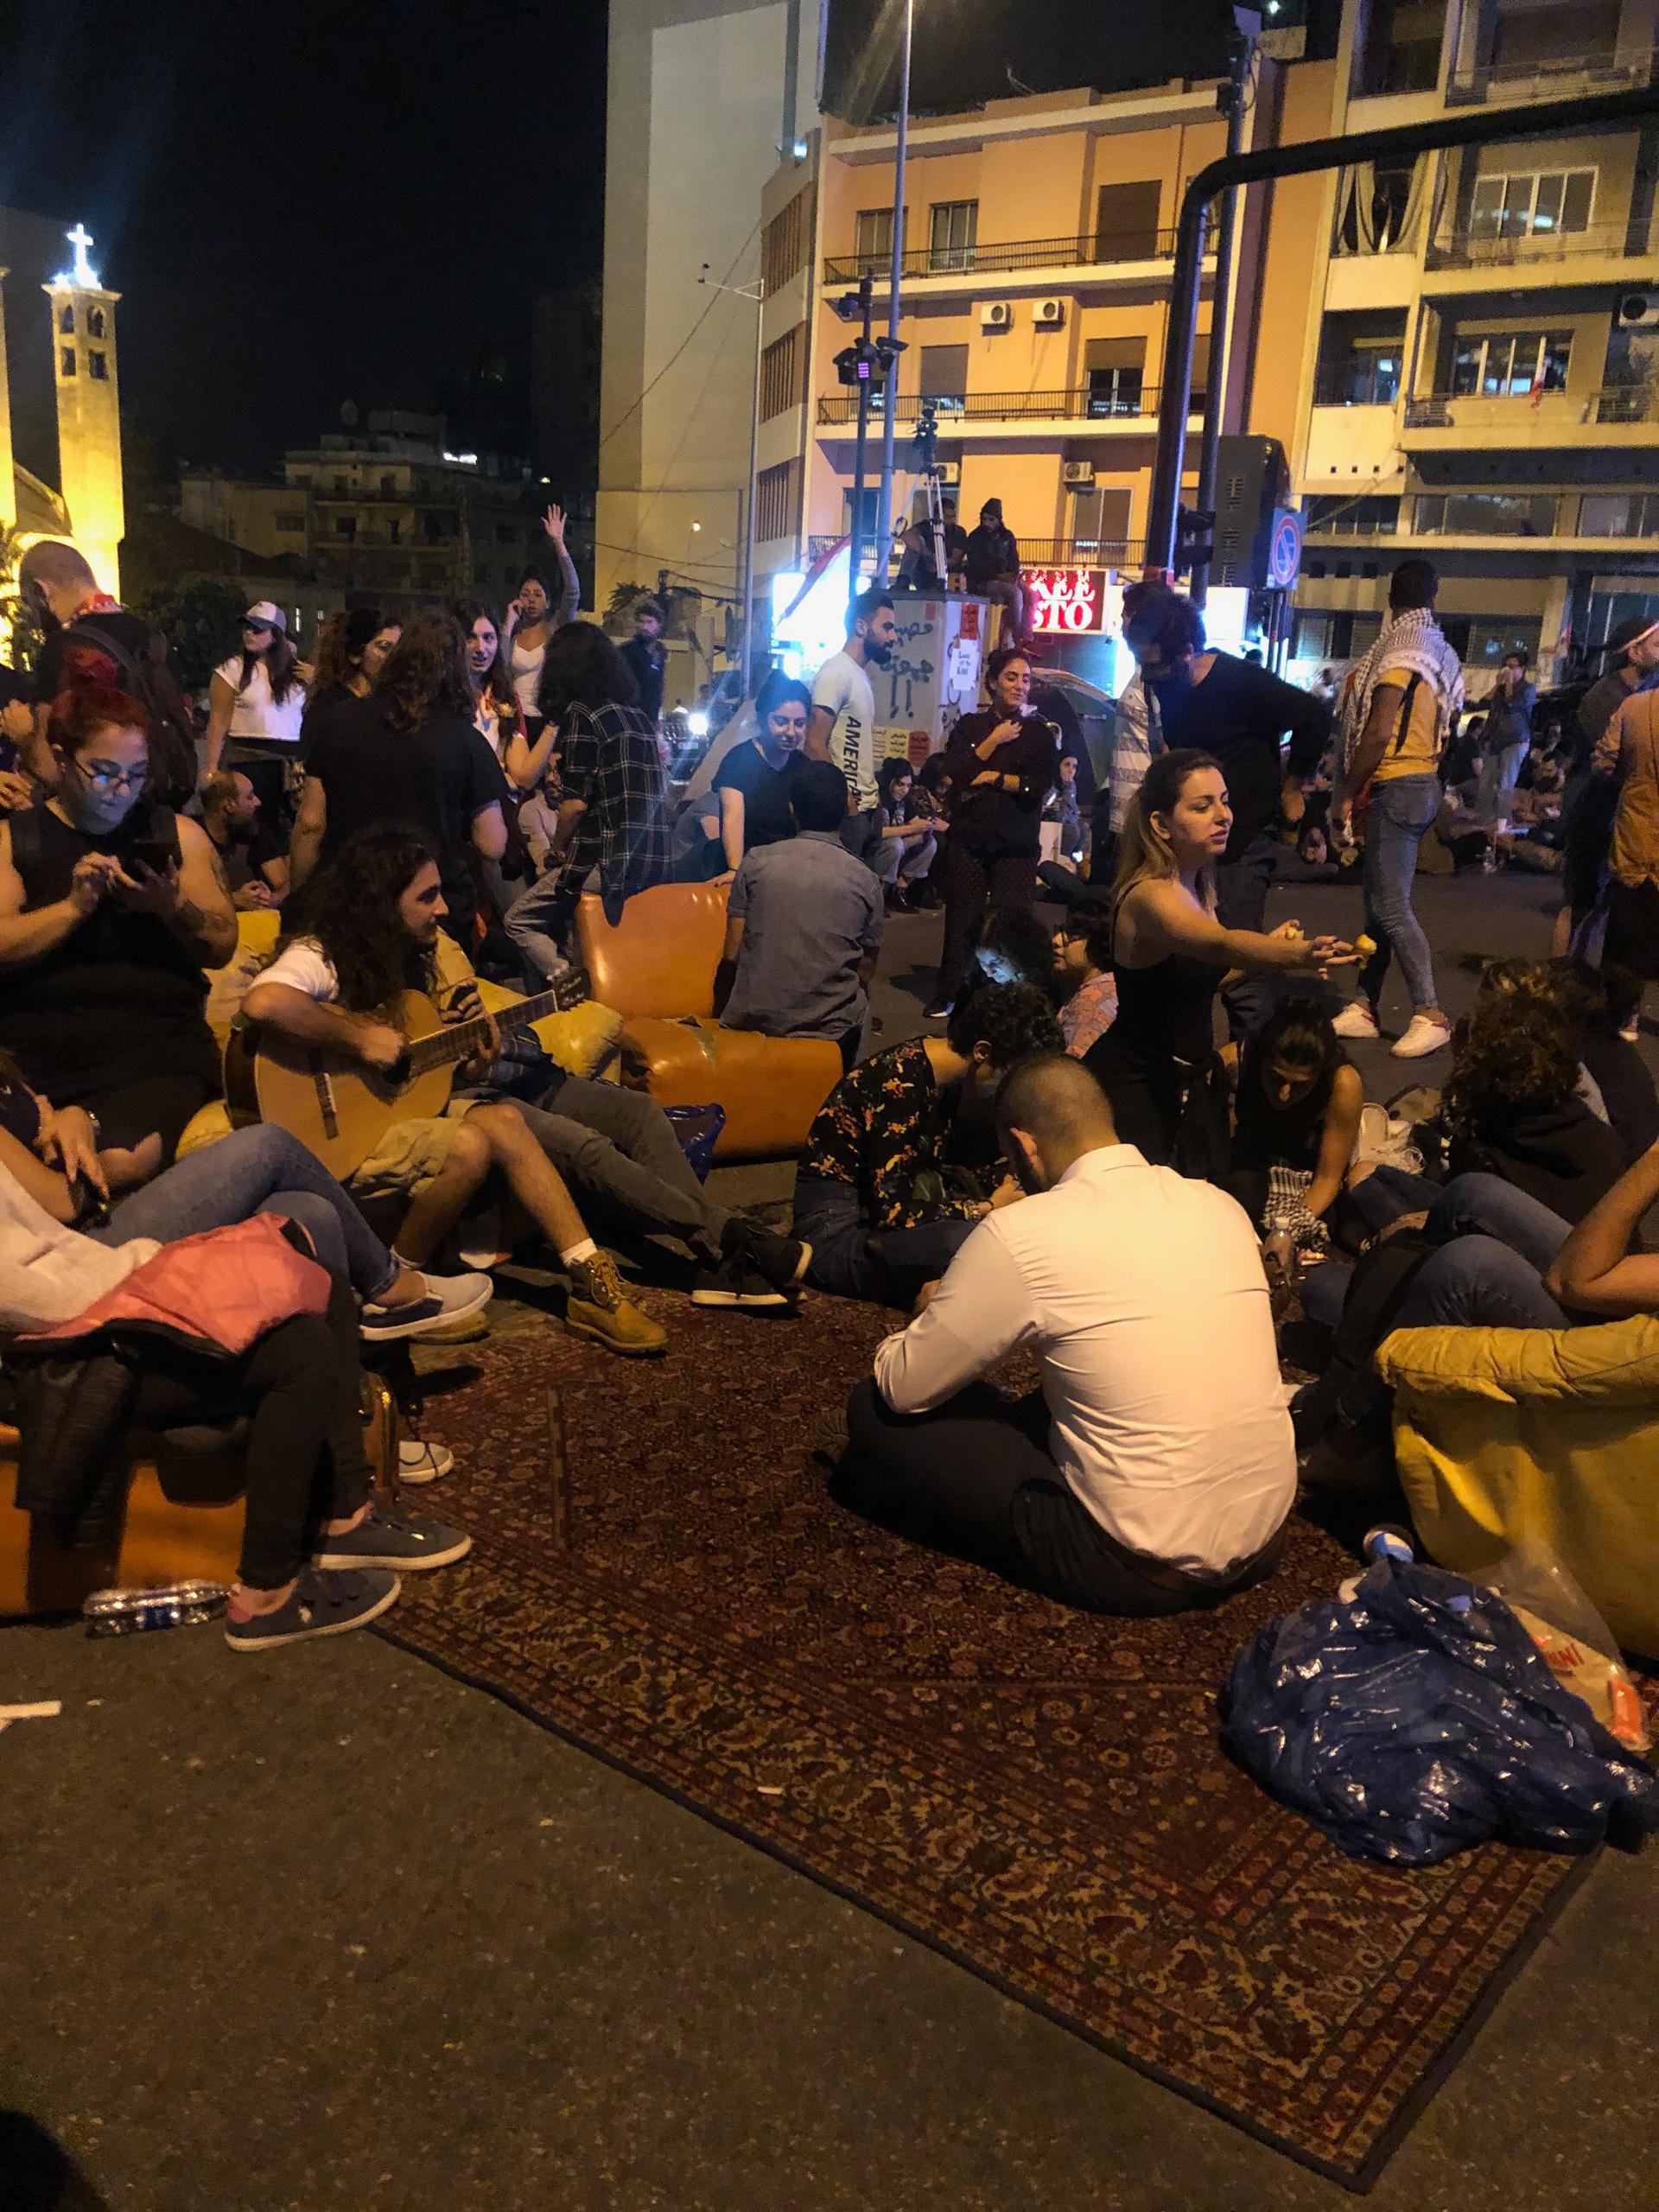 Protesters lay on a carpet as they block Beirut's Ring Bridge.